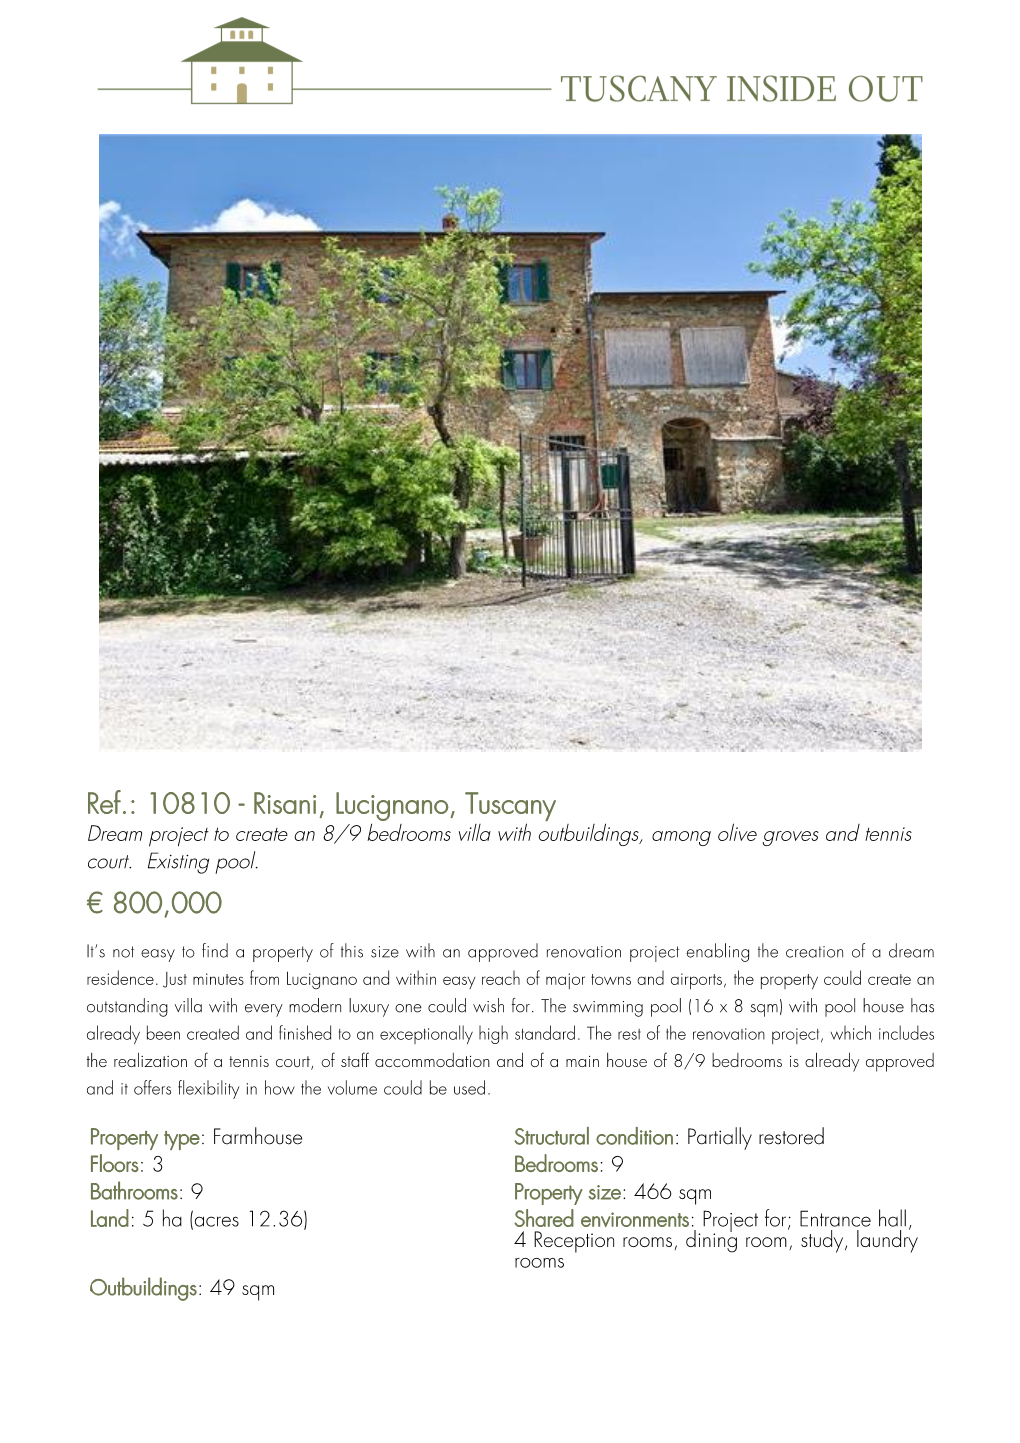 10810 - Risani, Lucignano, Tuscany Dream Project to Create an 8/9 Bedrooms Villa with Outbuildings, Among Olive Groves and Tennis Court